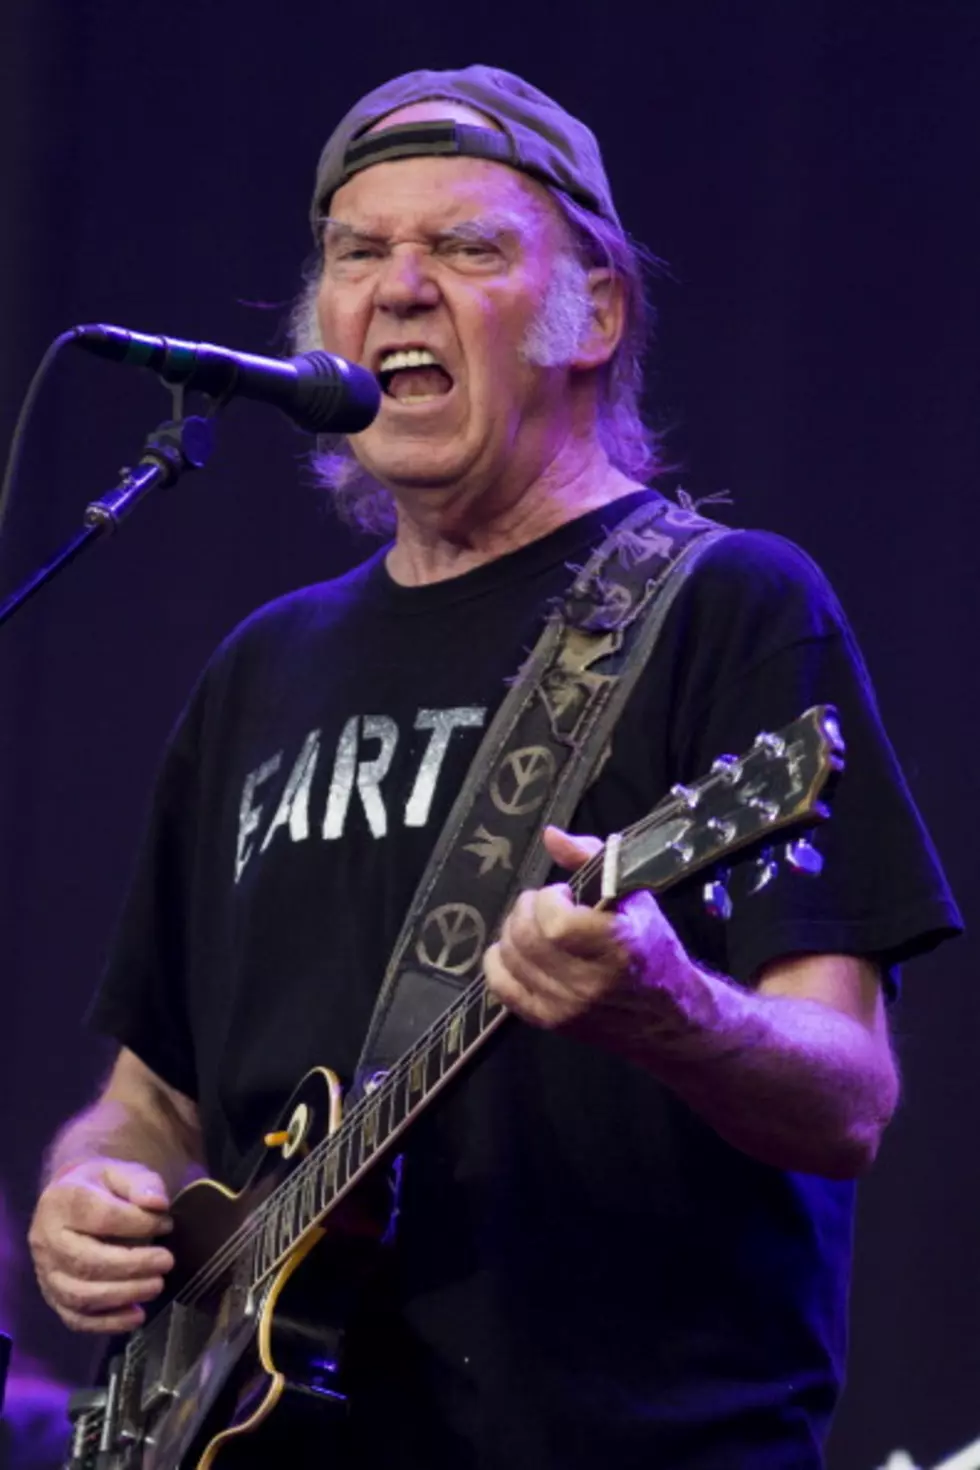 Neil Young’s Shirt Says What??